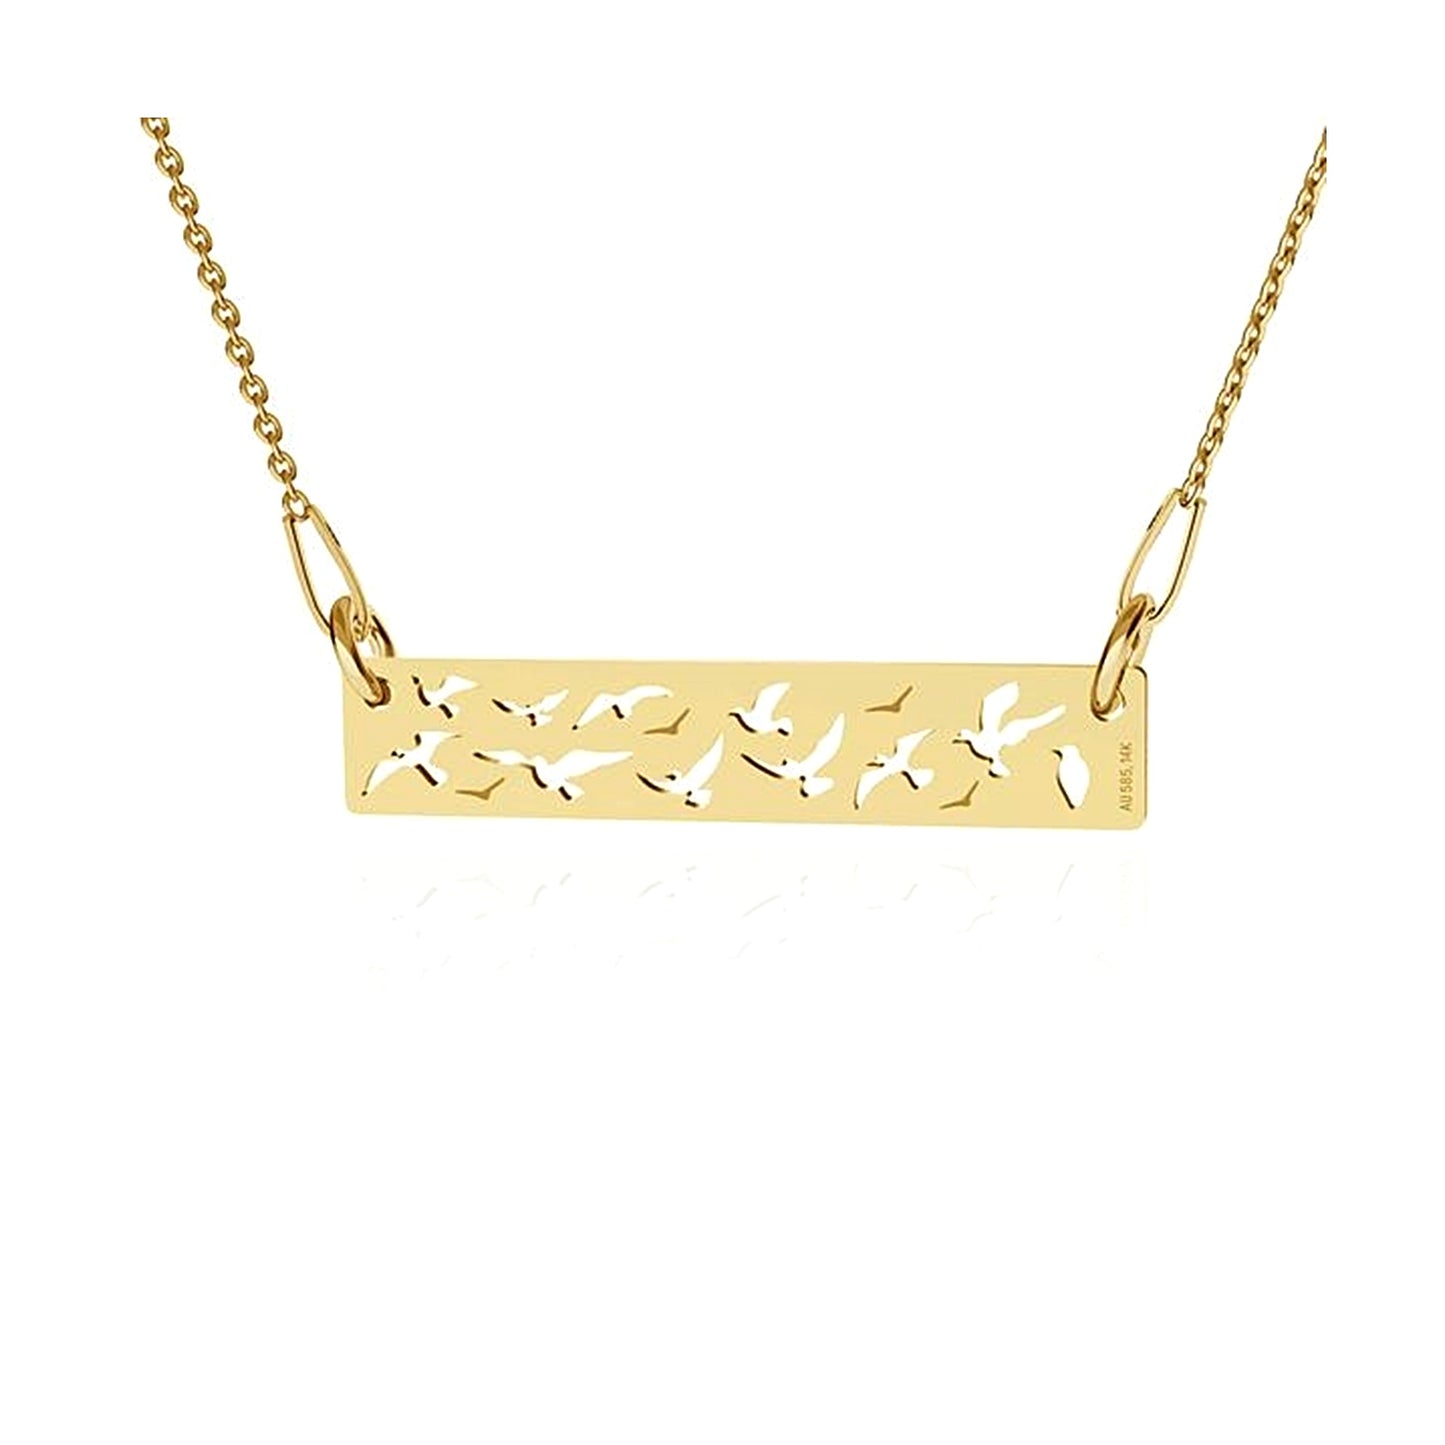 BIRDS NECKLACE - 14K SOLID GOLD